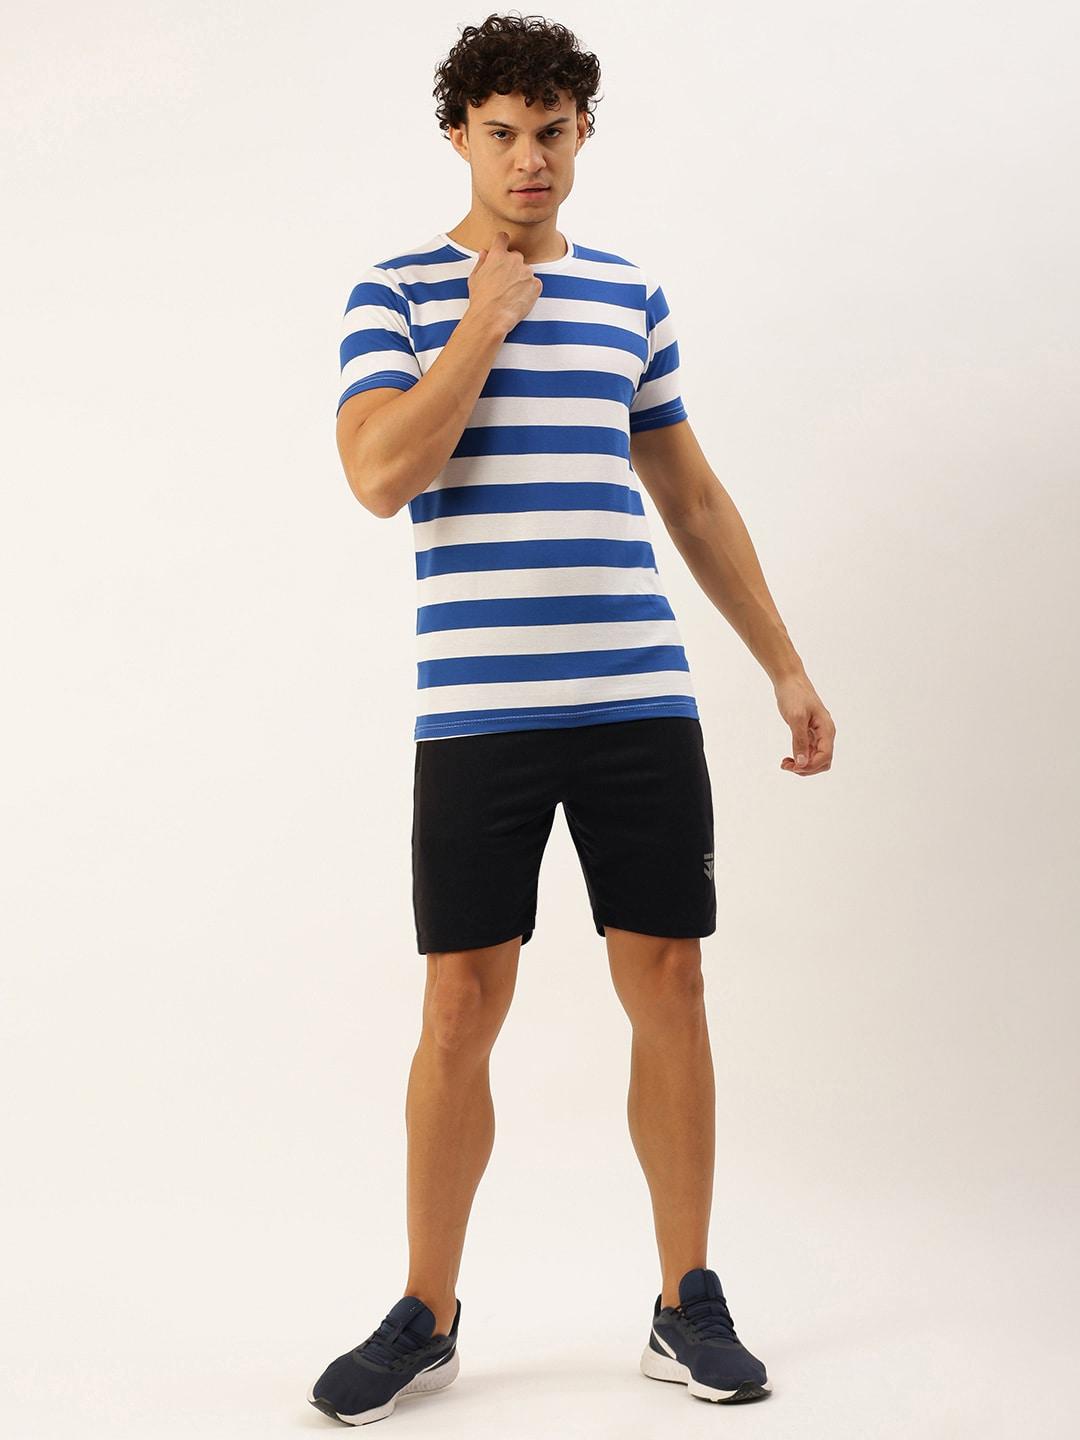 sports52 wear men striped t-shirt and mid-rise shorts training tracksuit